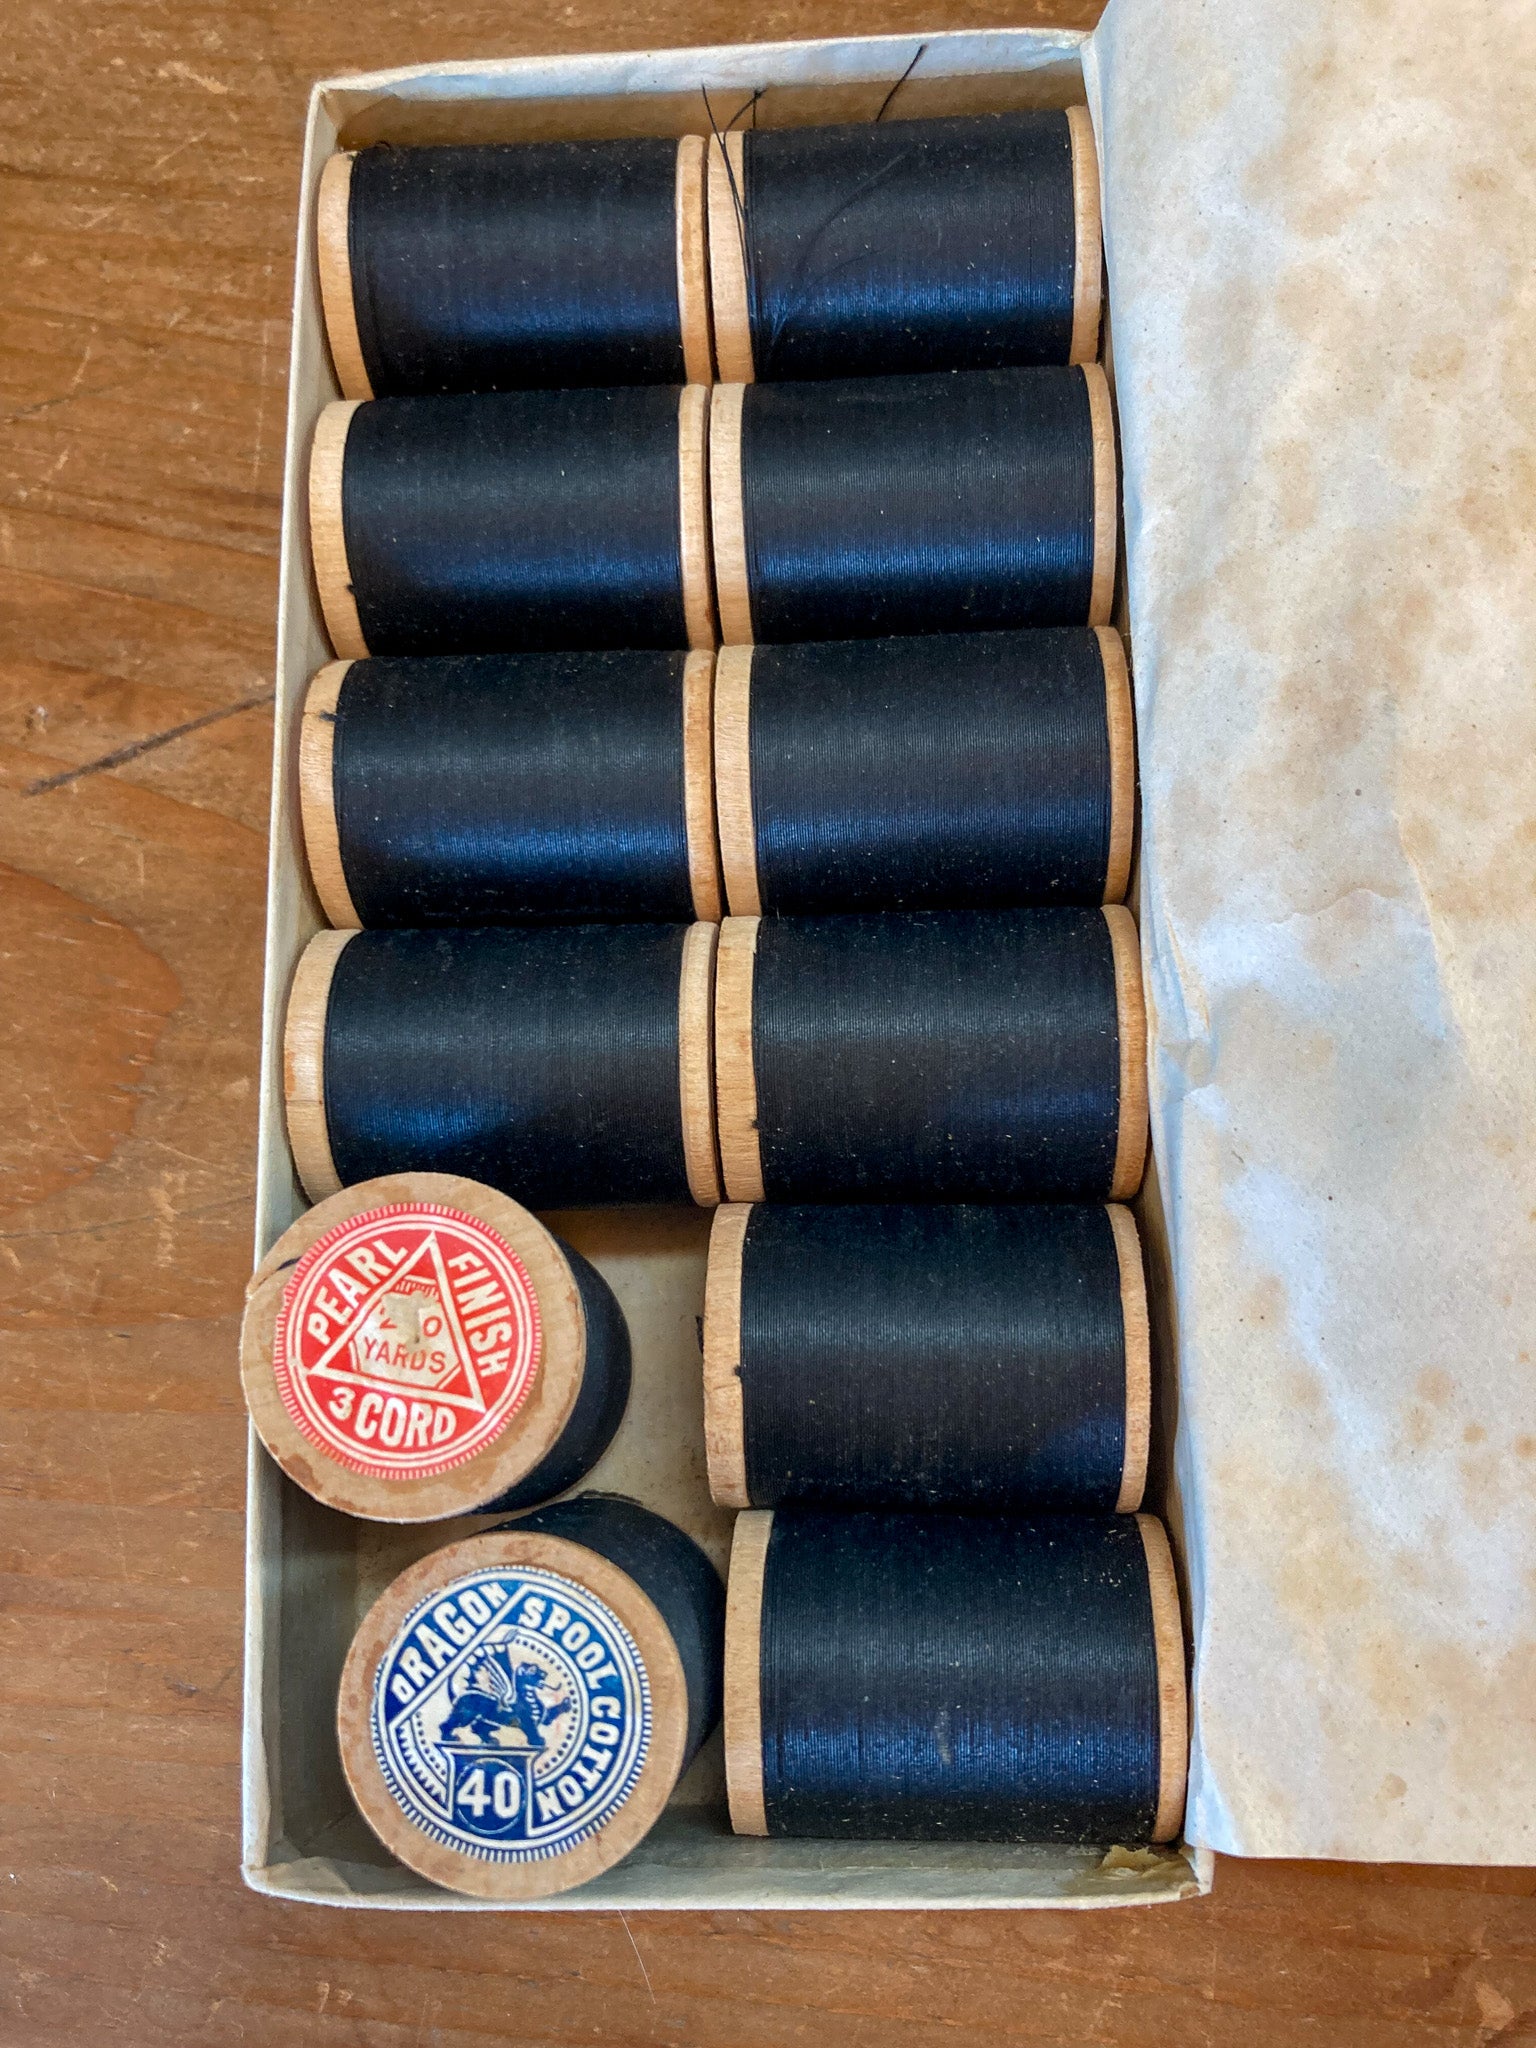 1880 – 1890 Dragon Spool Cotton, New in Original Box and H. Milward Needles, New in Original Package